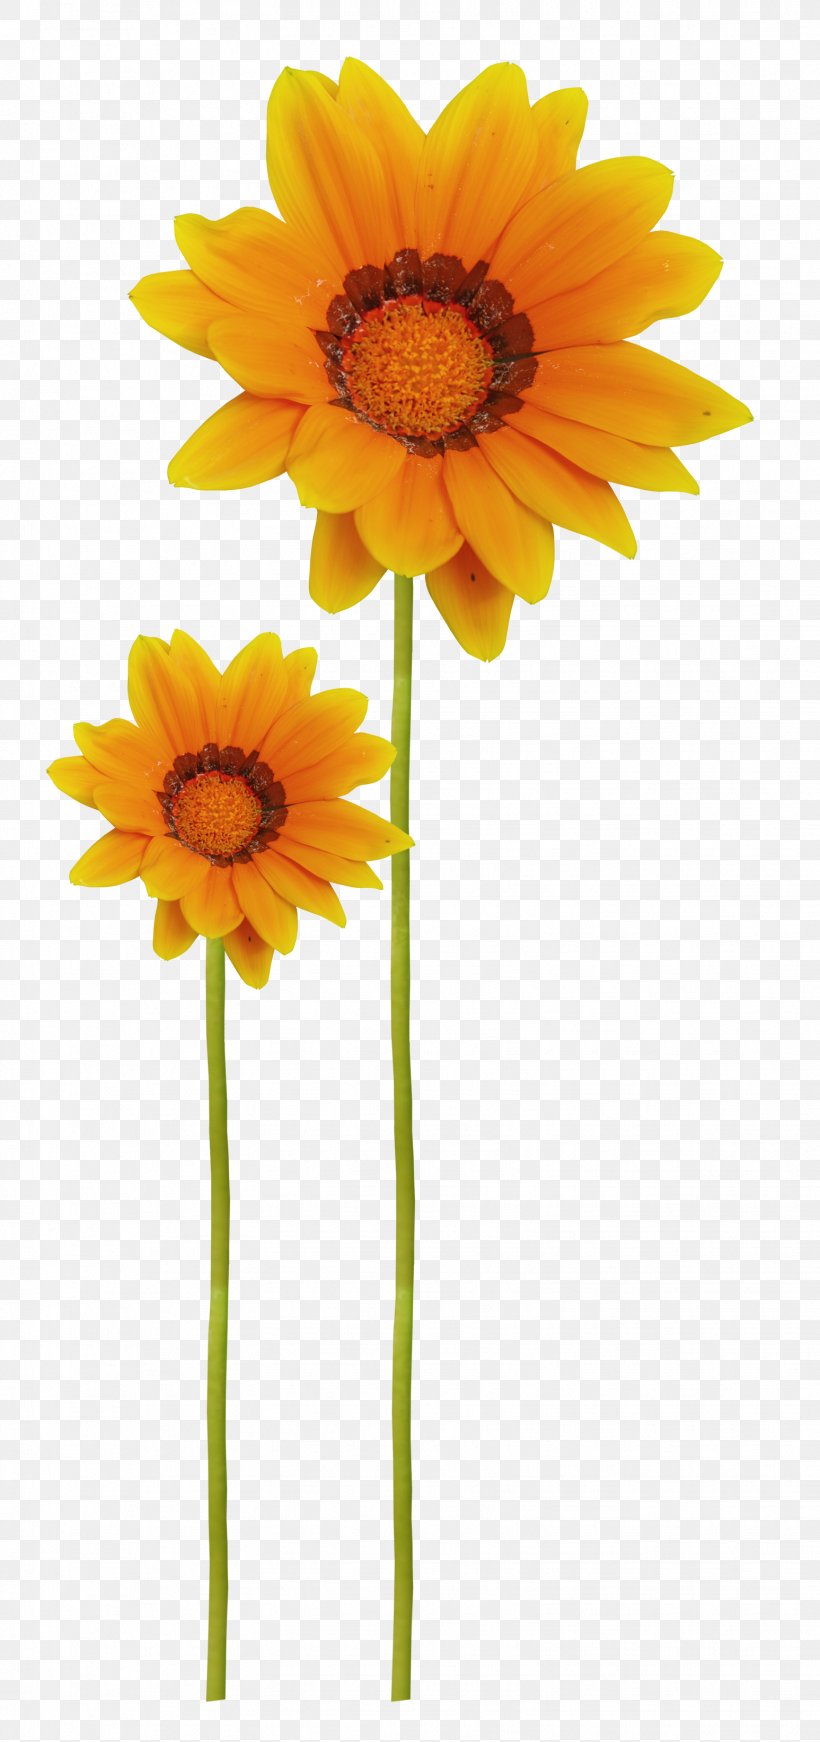 Common Sunflower Raster Graphics Clip Art, PNG, 1547x3288px, Common Sunflower, Cut Flowers, Daisy Family, Flower, Flower Bouquet Download Free